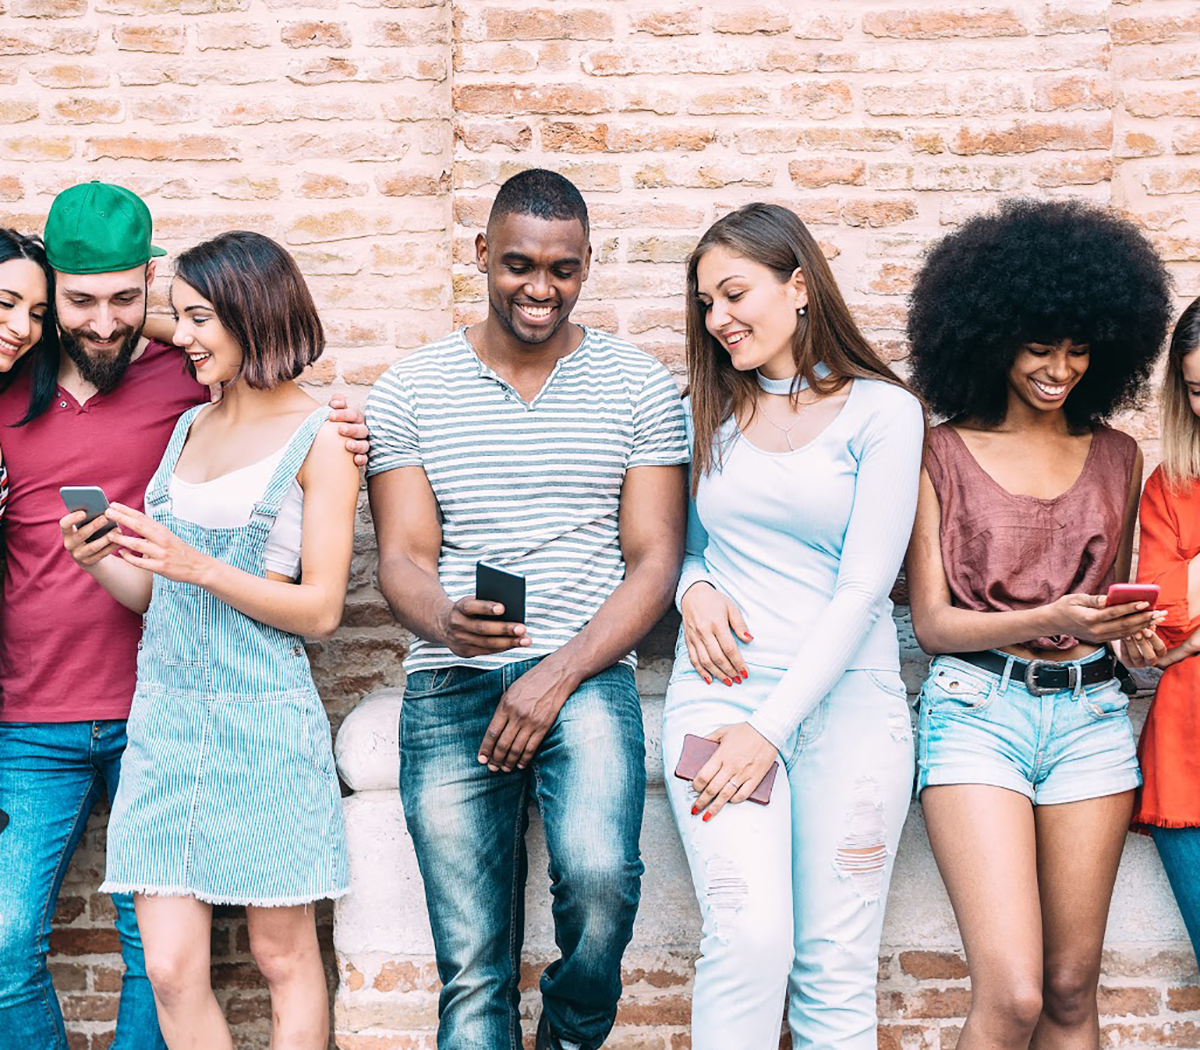 How marketing to millennials can help you build brand loyalty.